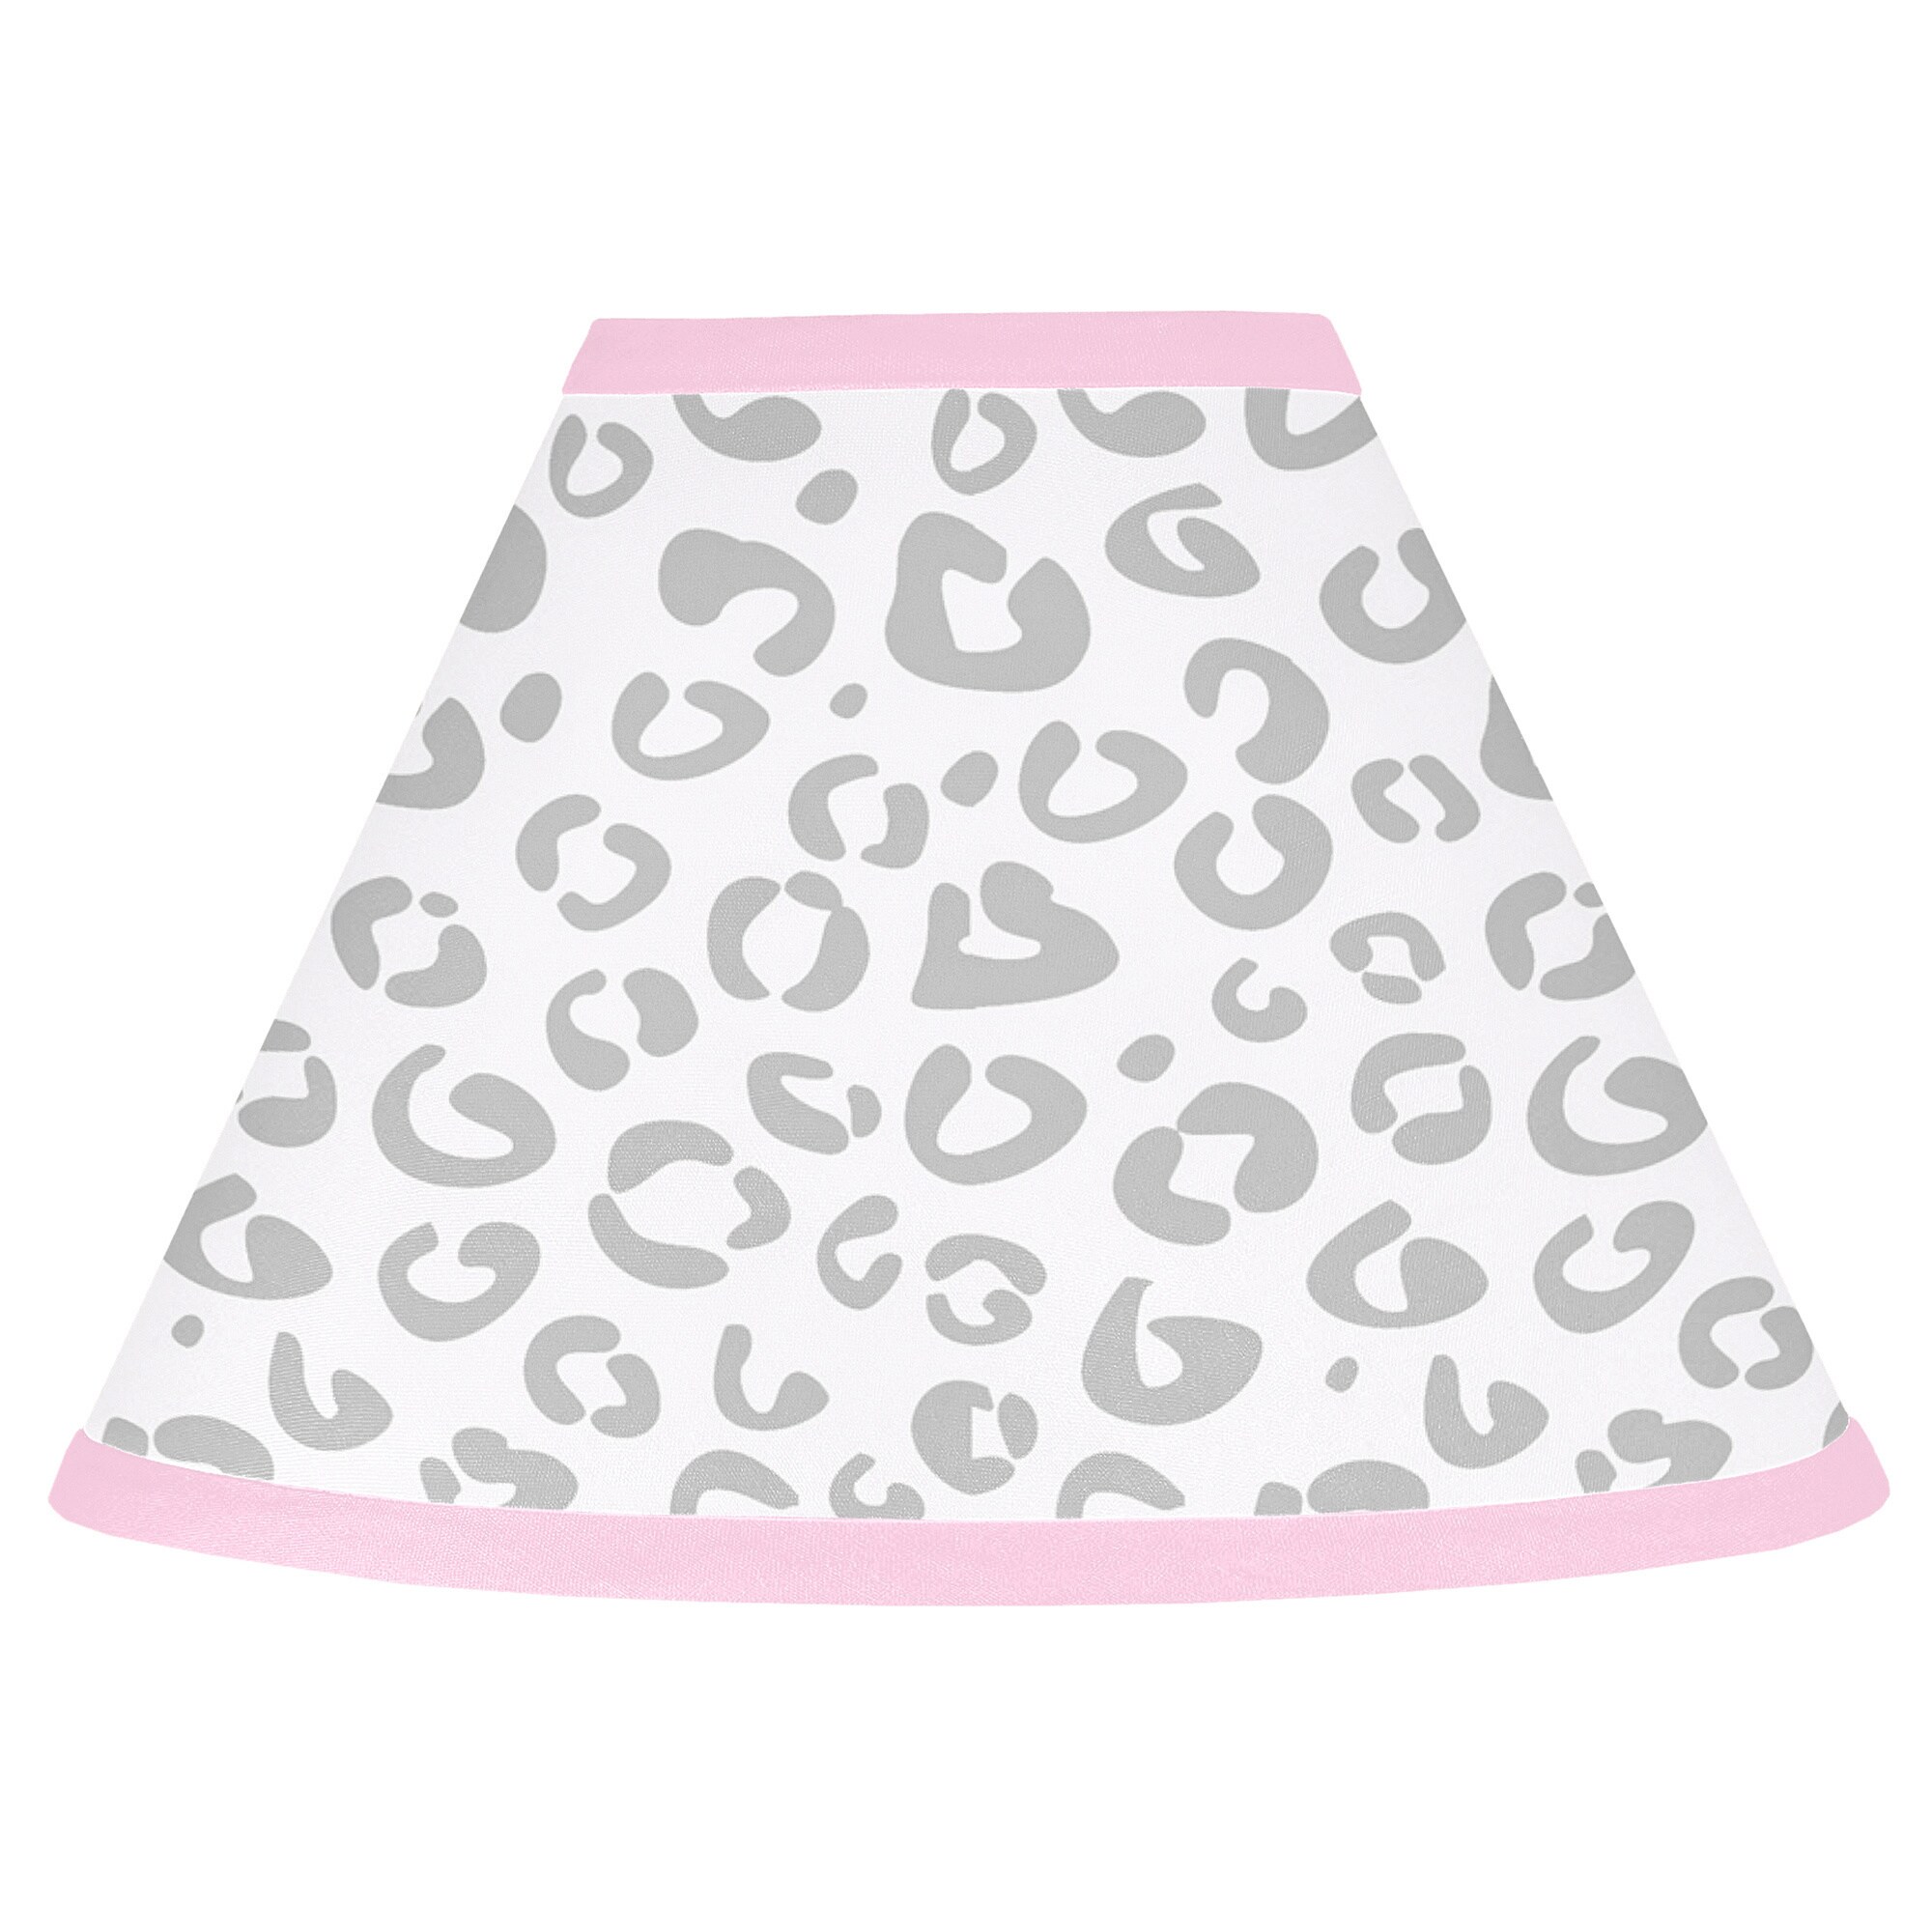 Sweet Jojo Designs Kenya Lamp Shade (Pink/ grey/ whiteImportedThe digital images we display have the most accurate color possible. However, due to differences in computer monitors, we cannot be responsible for variations in color between the actual produc